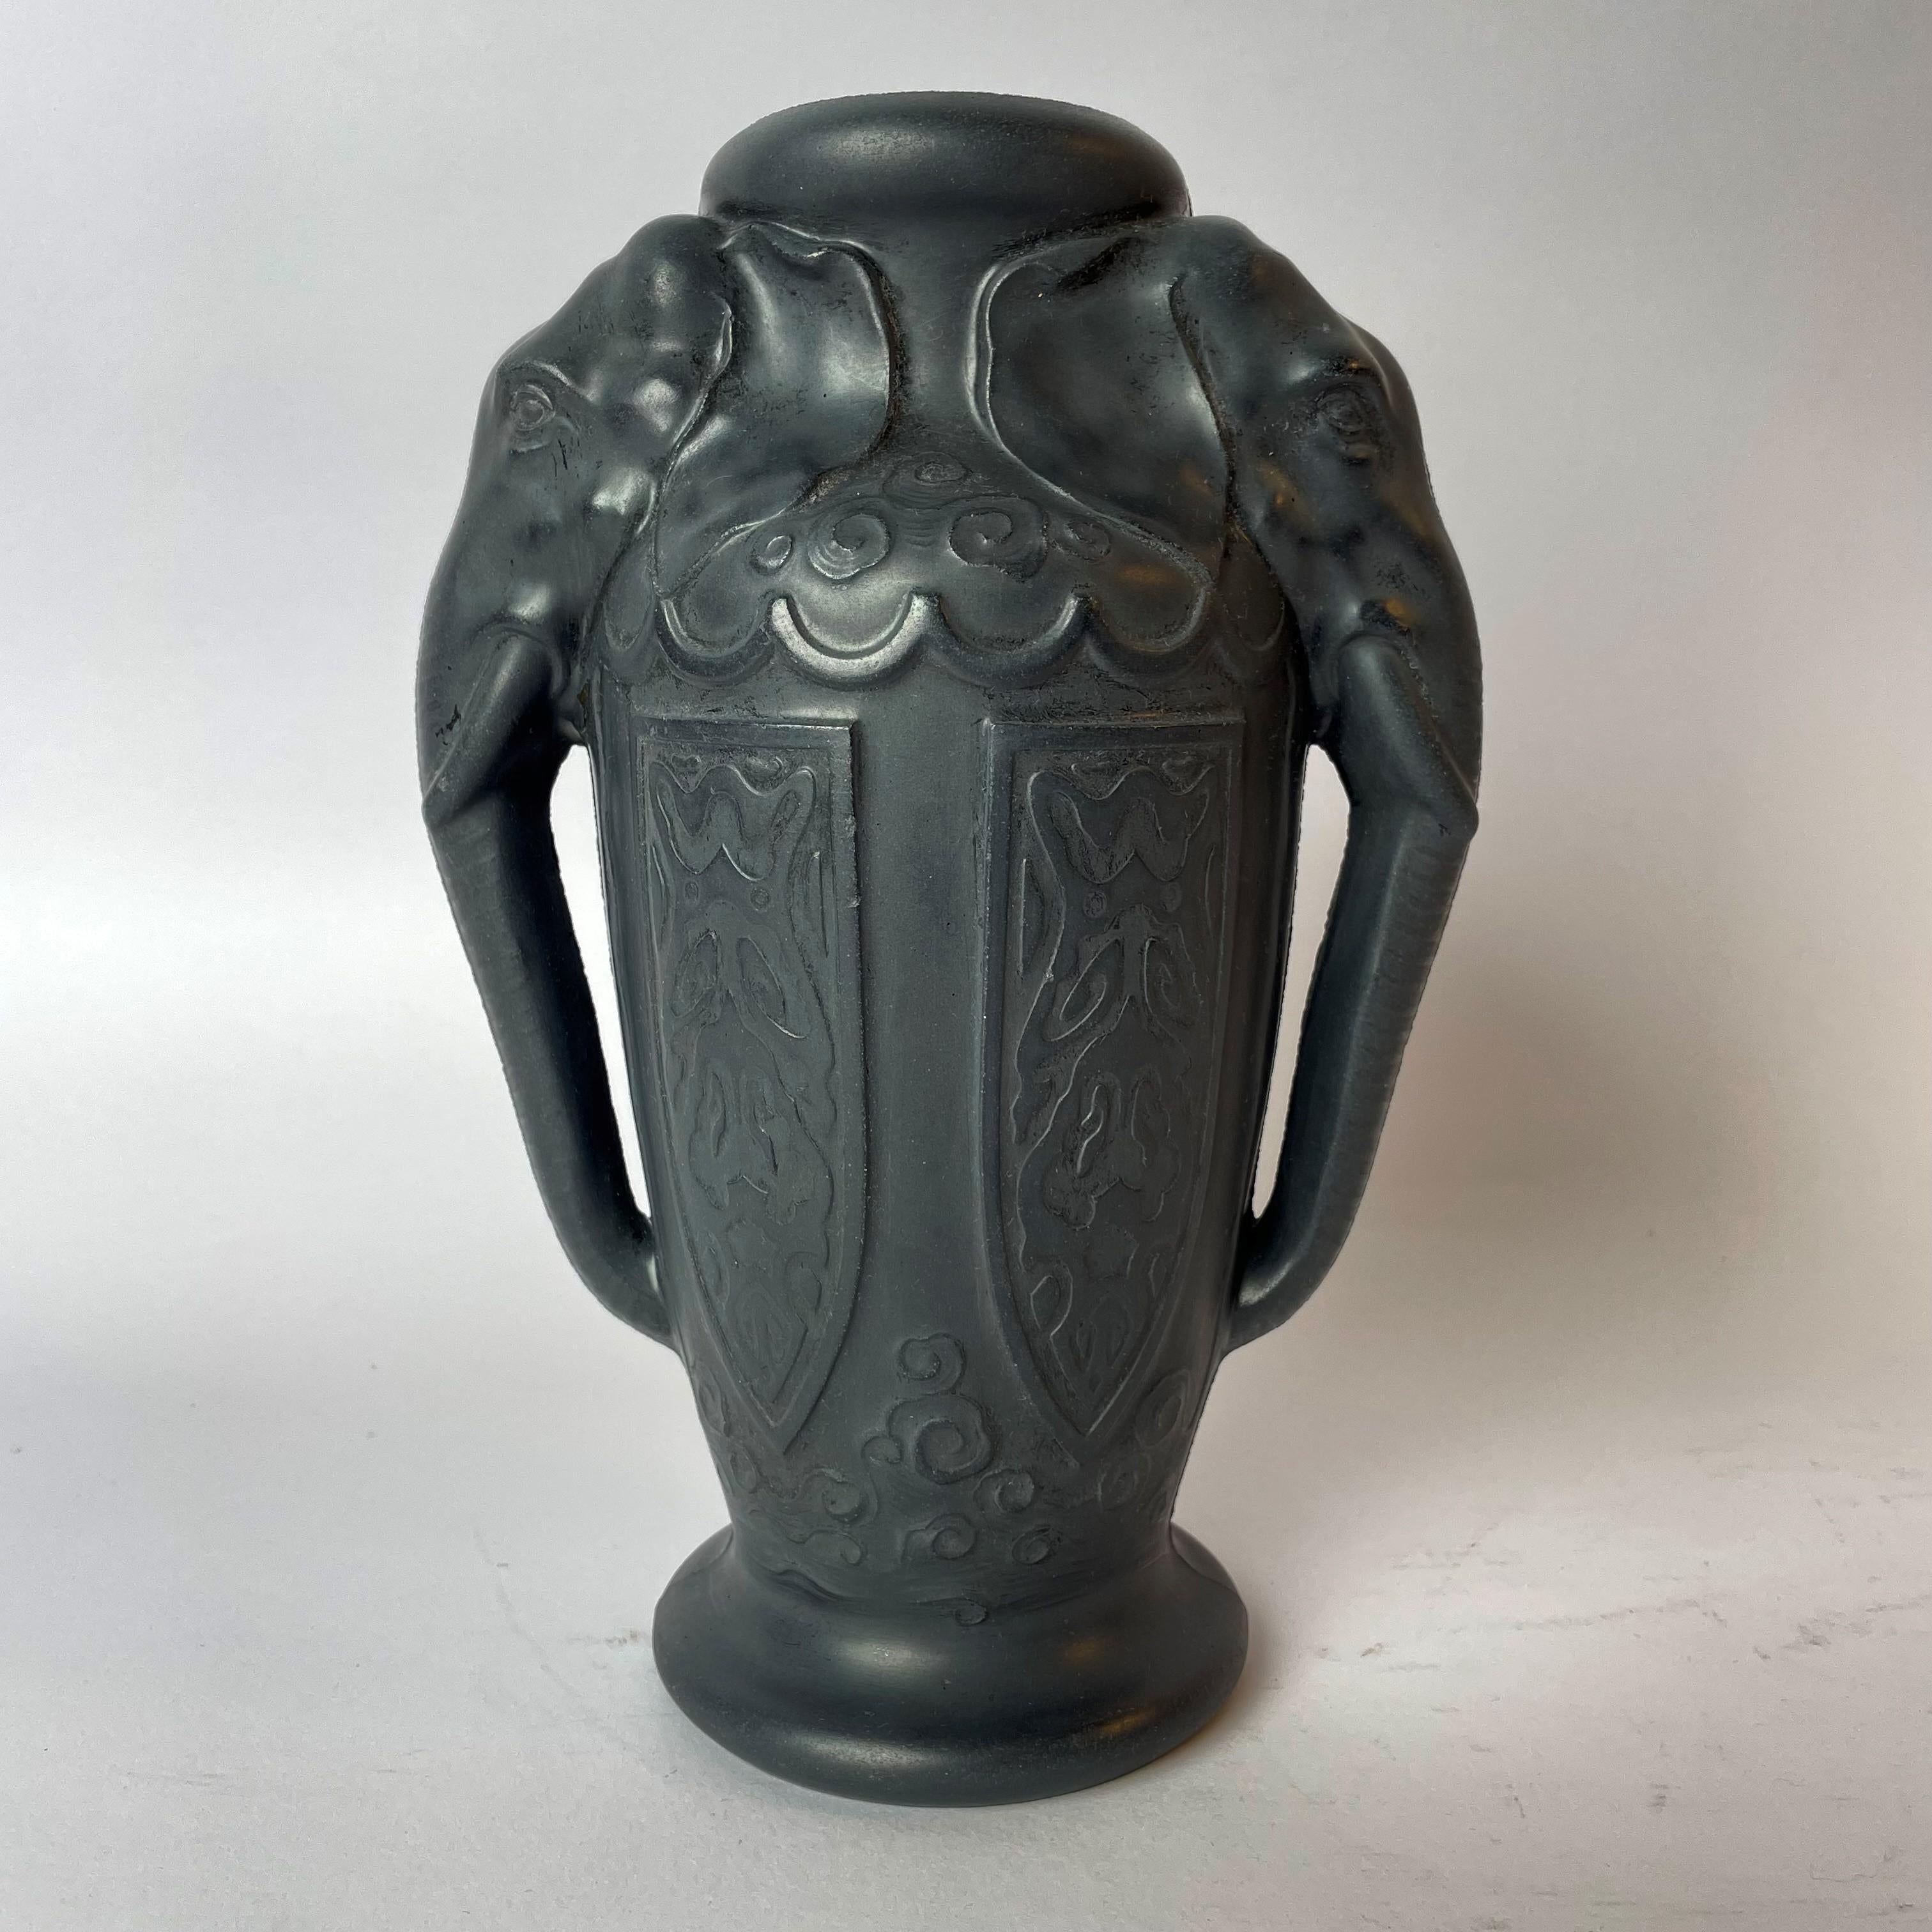 A rare and beautiful Lavanite vase decorated with Elephants. Art Nouveau circa 1910. Probably made by W. Henker & Co in Berlin during the 1910s. Marked Lavanit Patent under the vase.


Wear consistent with age and use.